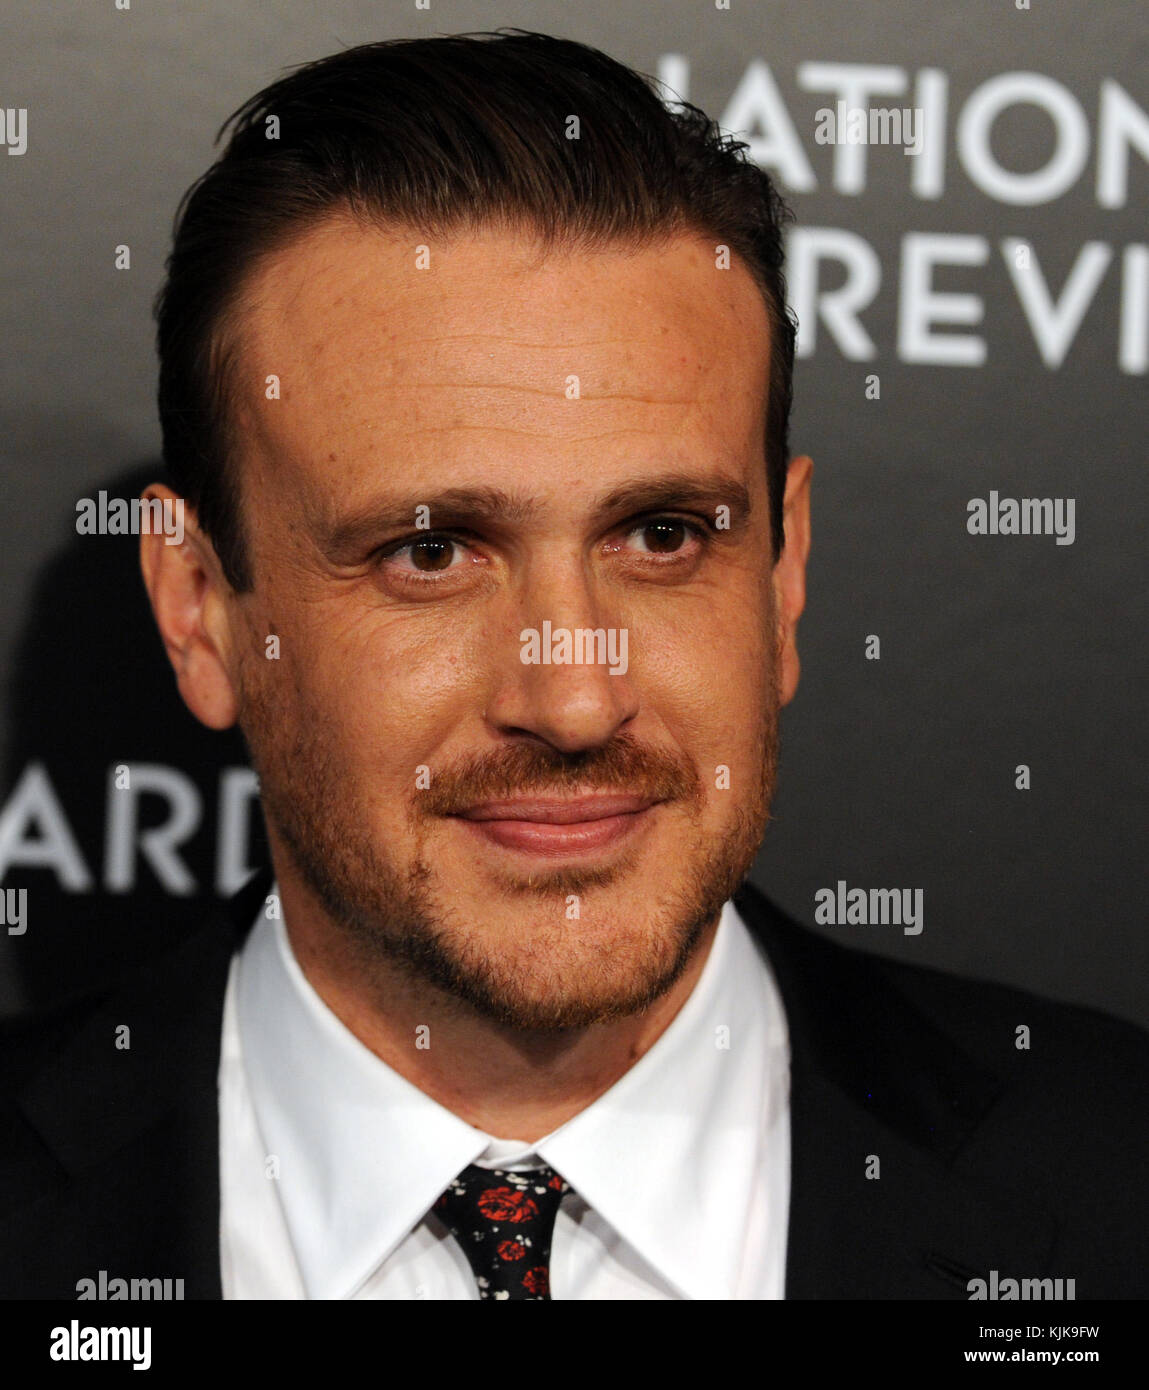 NEW YORK, NY - JANUARY 05: Jason Segel attends the 2015 National Board of Review Gala at Cipriani 42nd Street on January 5, 2016 in New York City   People:  Jason Segel Stock Photo